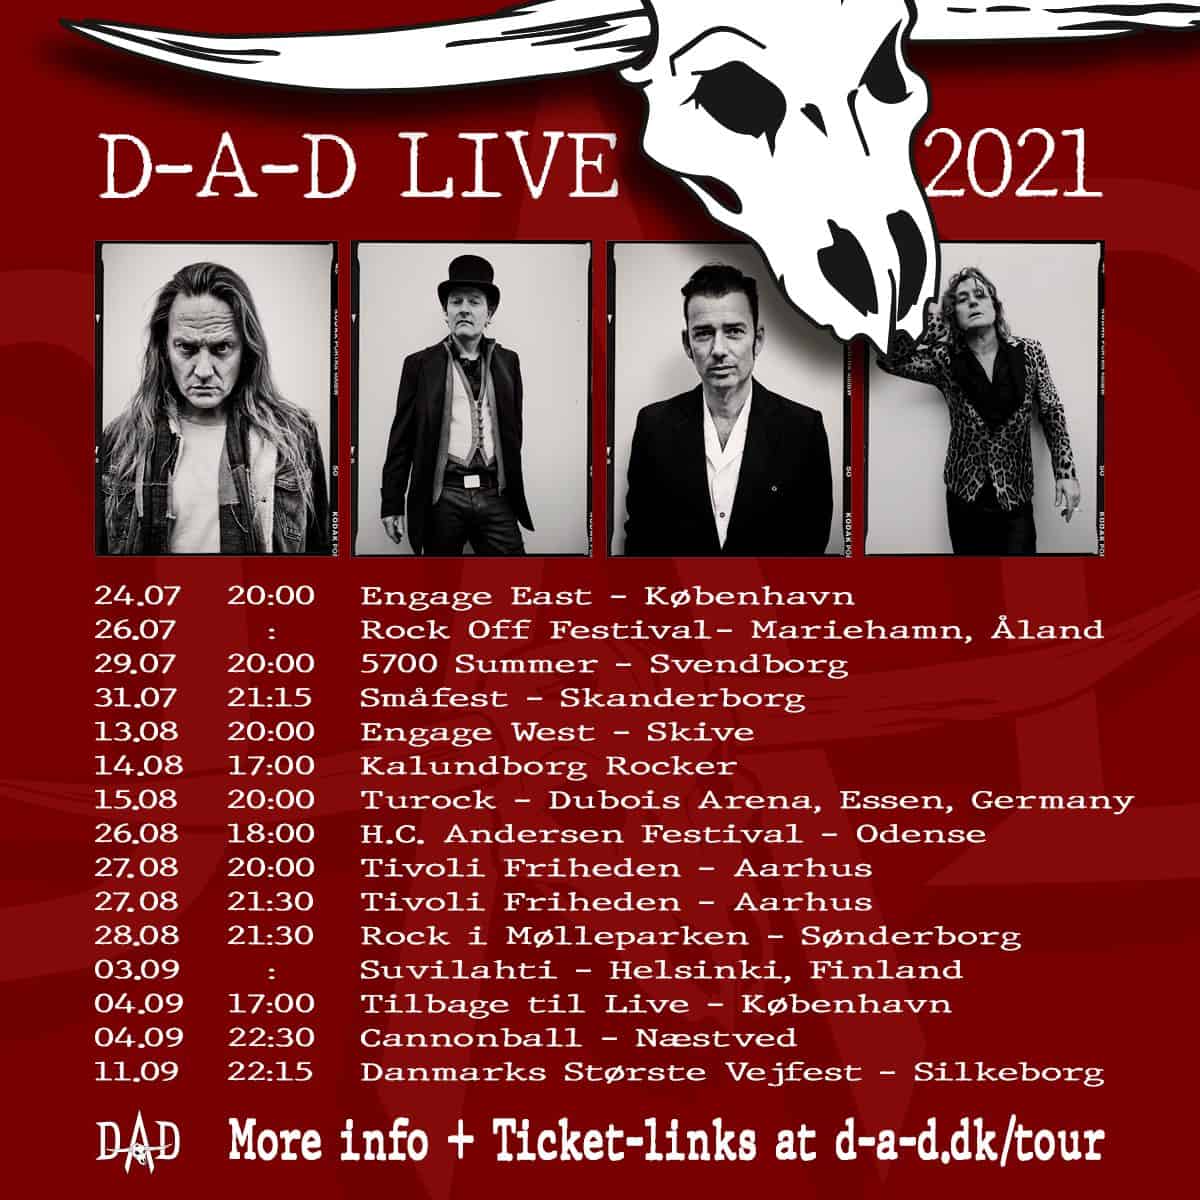 POSTER FOR D-A-D LIVE 2021